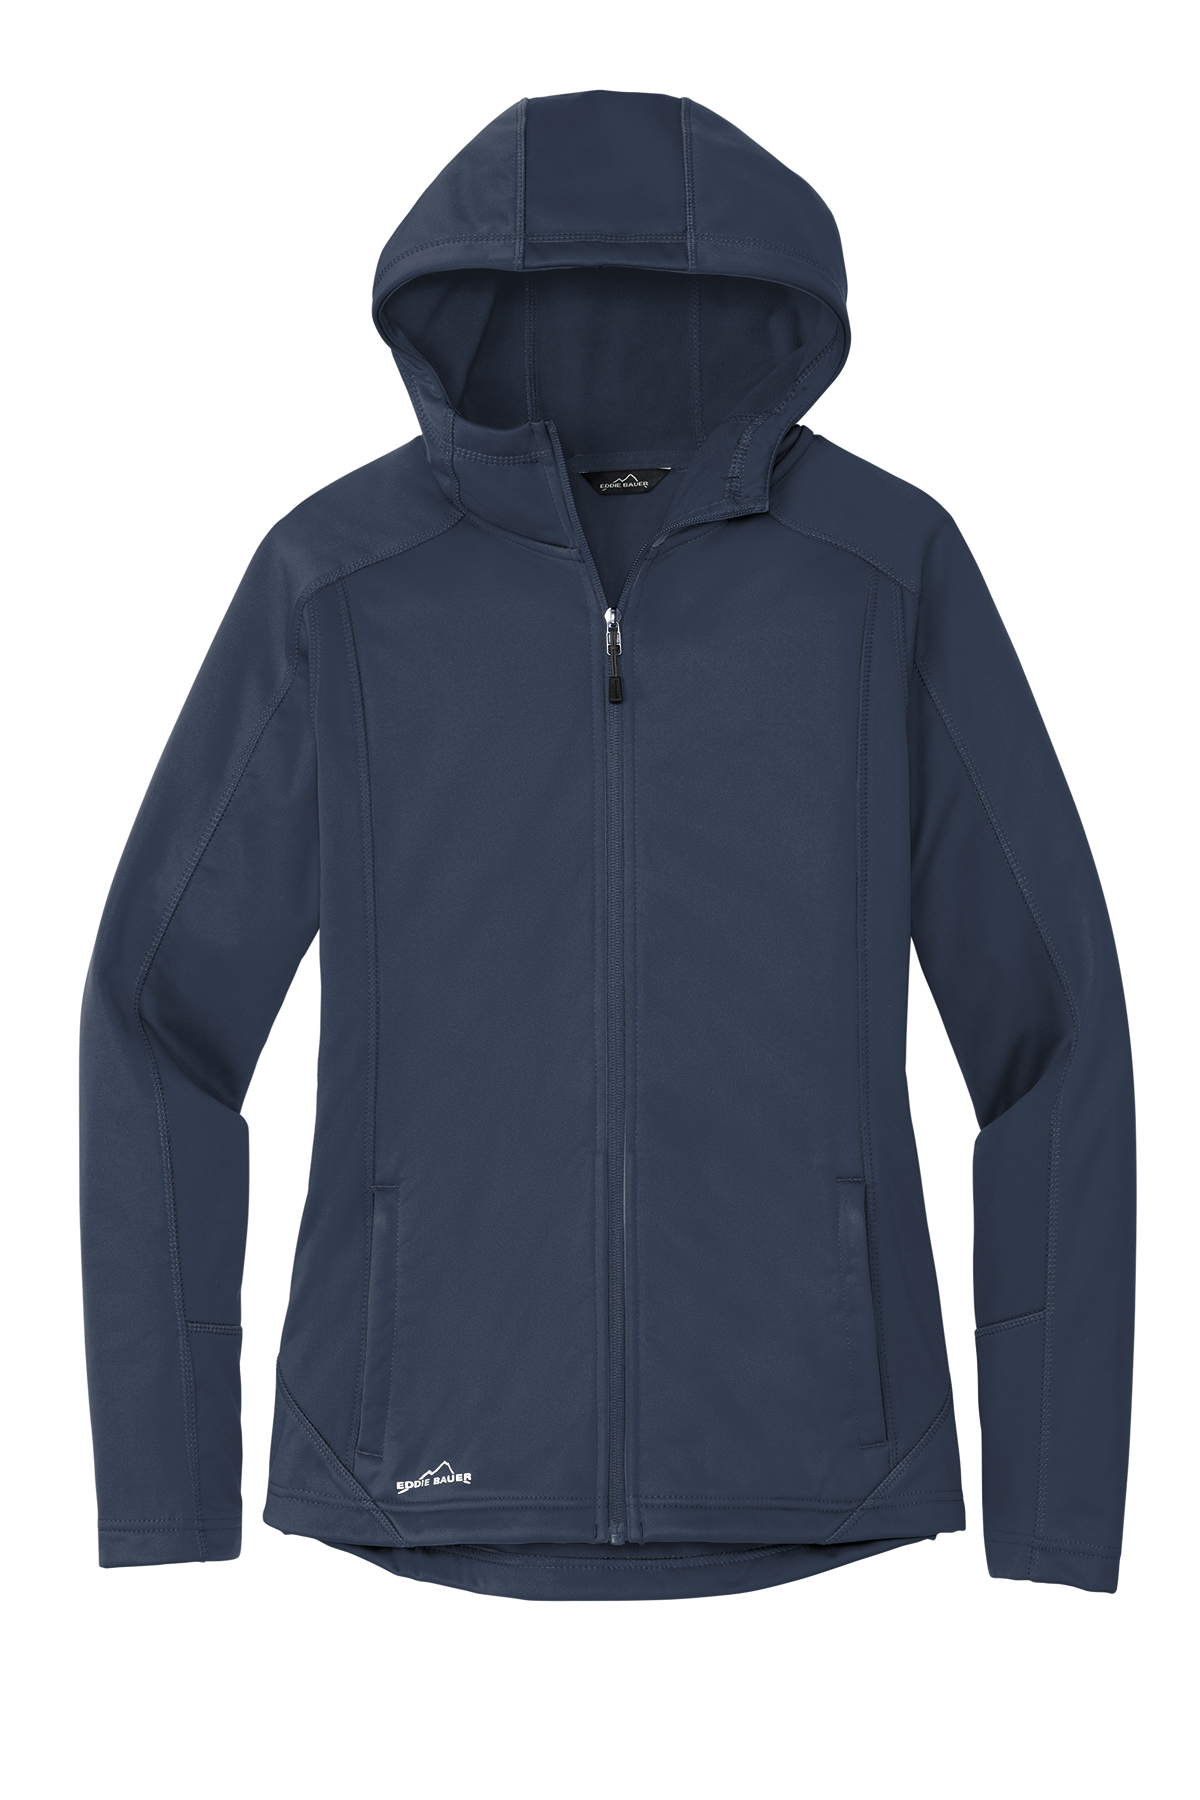 Bauer Company Product Shell Ladies Jacket Trail | Casuals Eddie | Soft